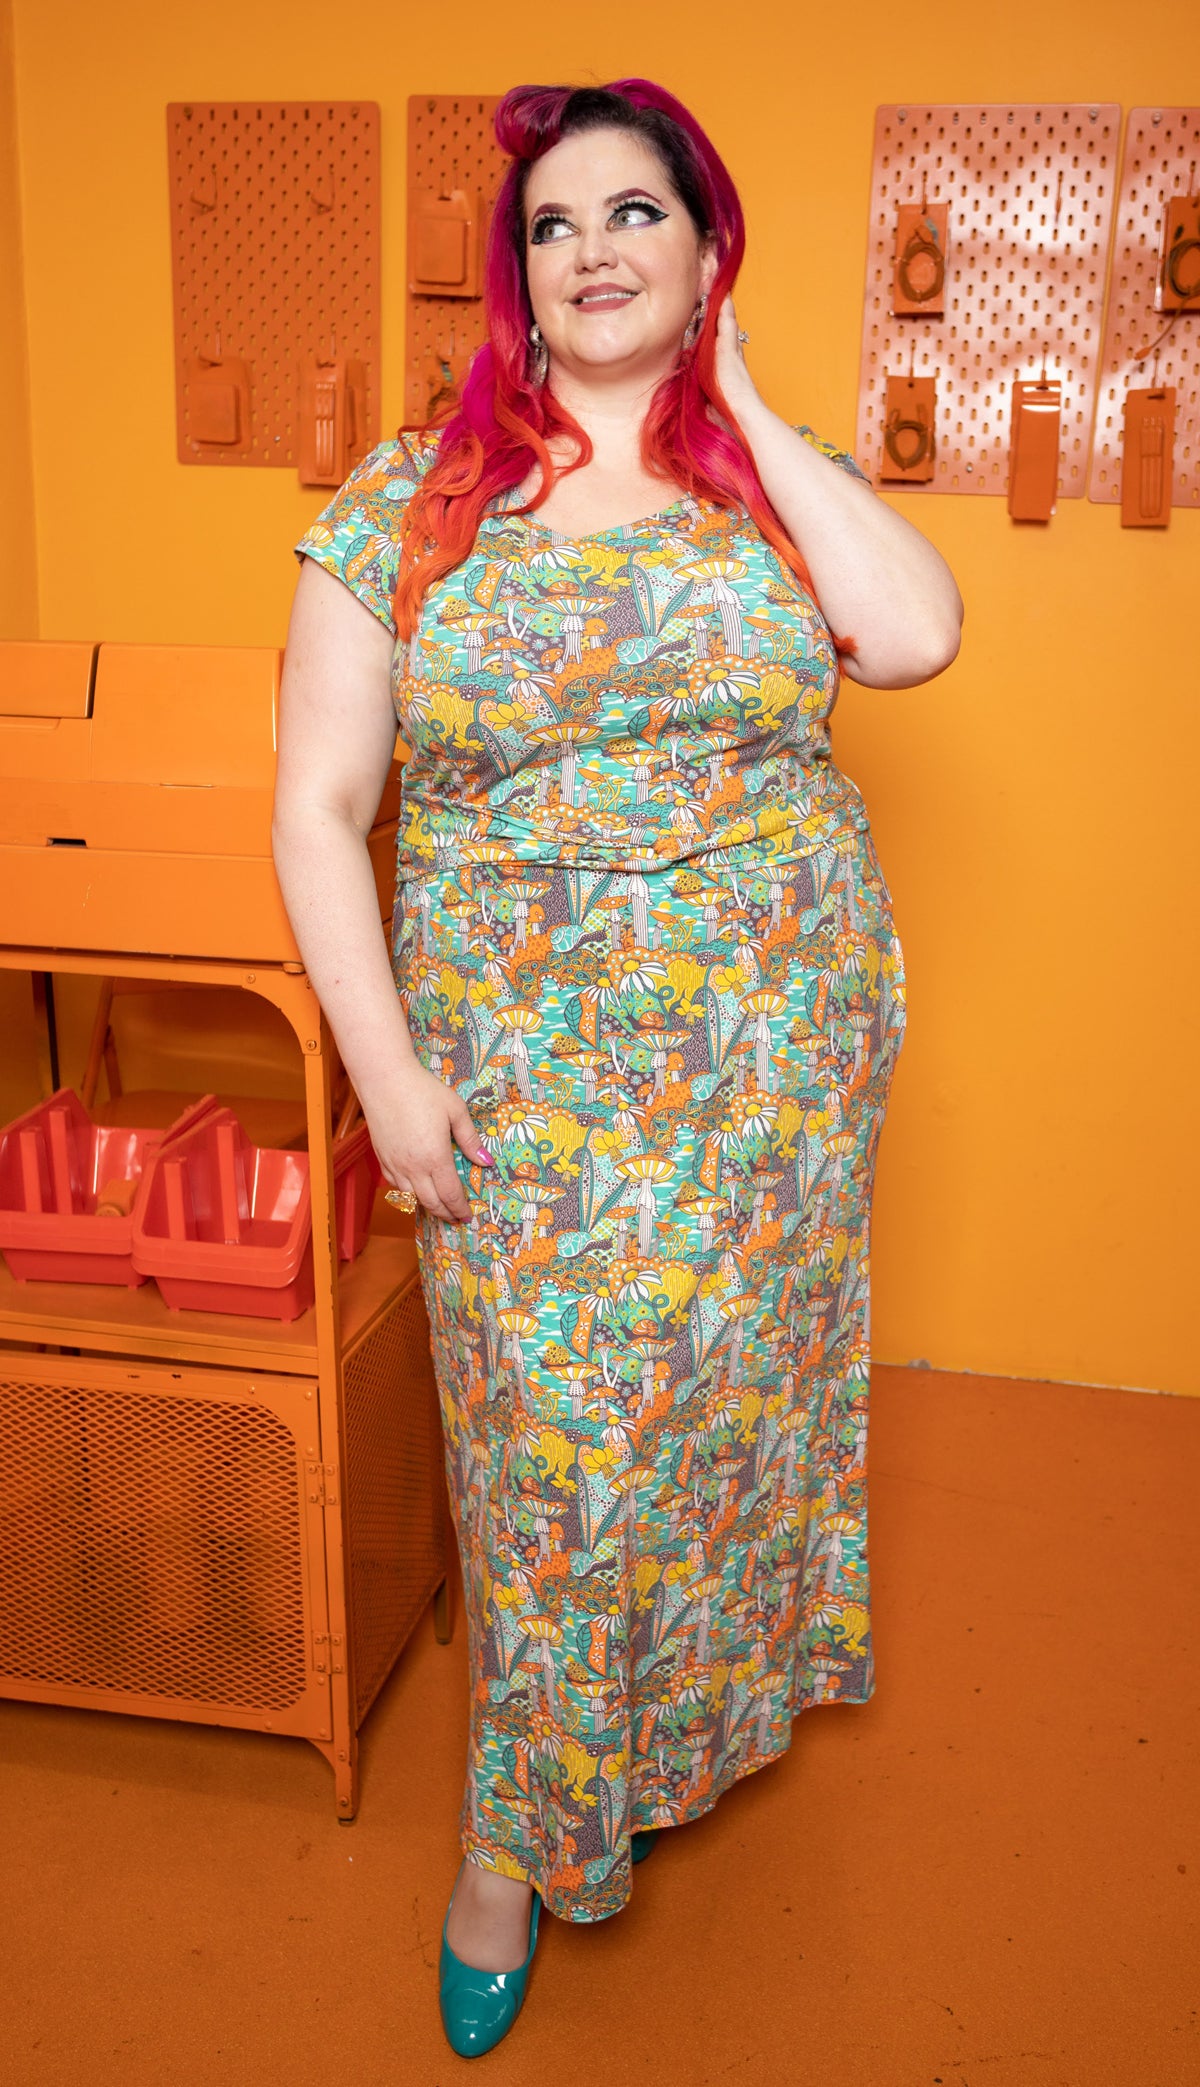 Model wearing twist belt, cap-sleeved dress featuring yellow, orange and green mushrooms, snails and flowers